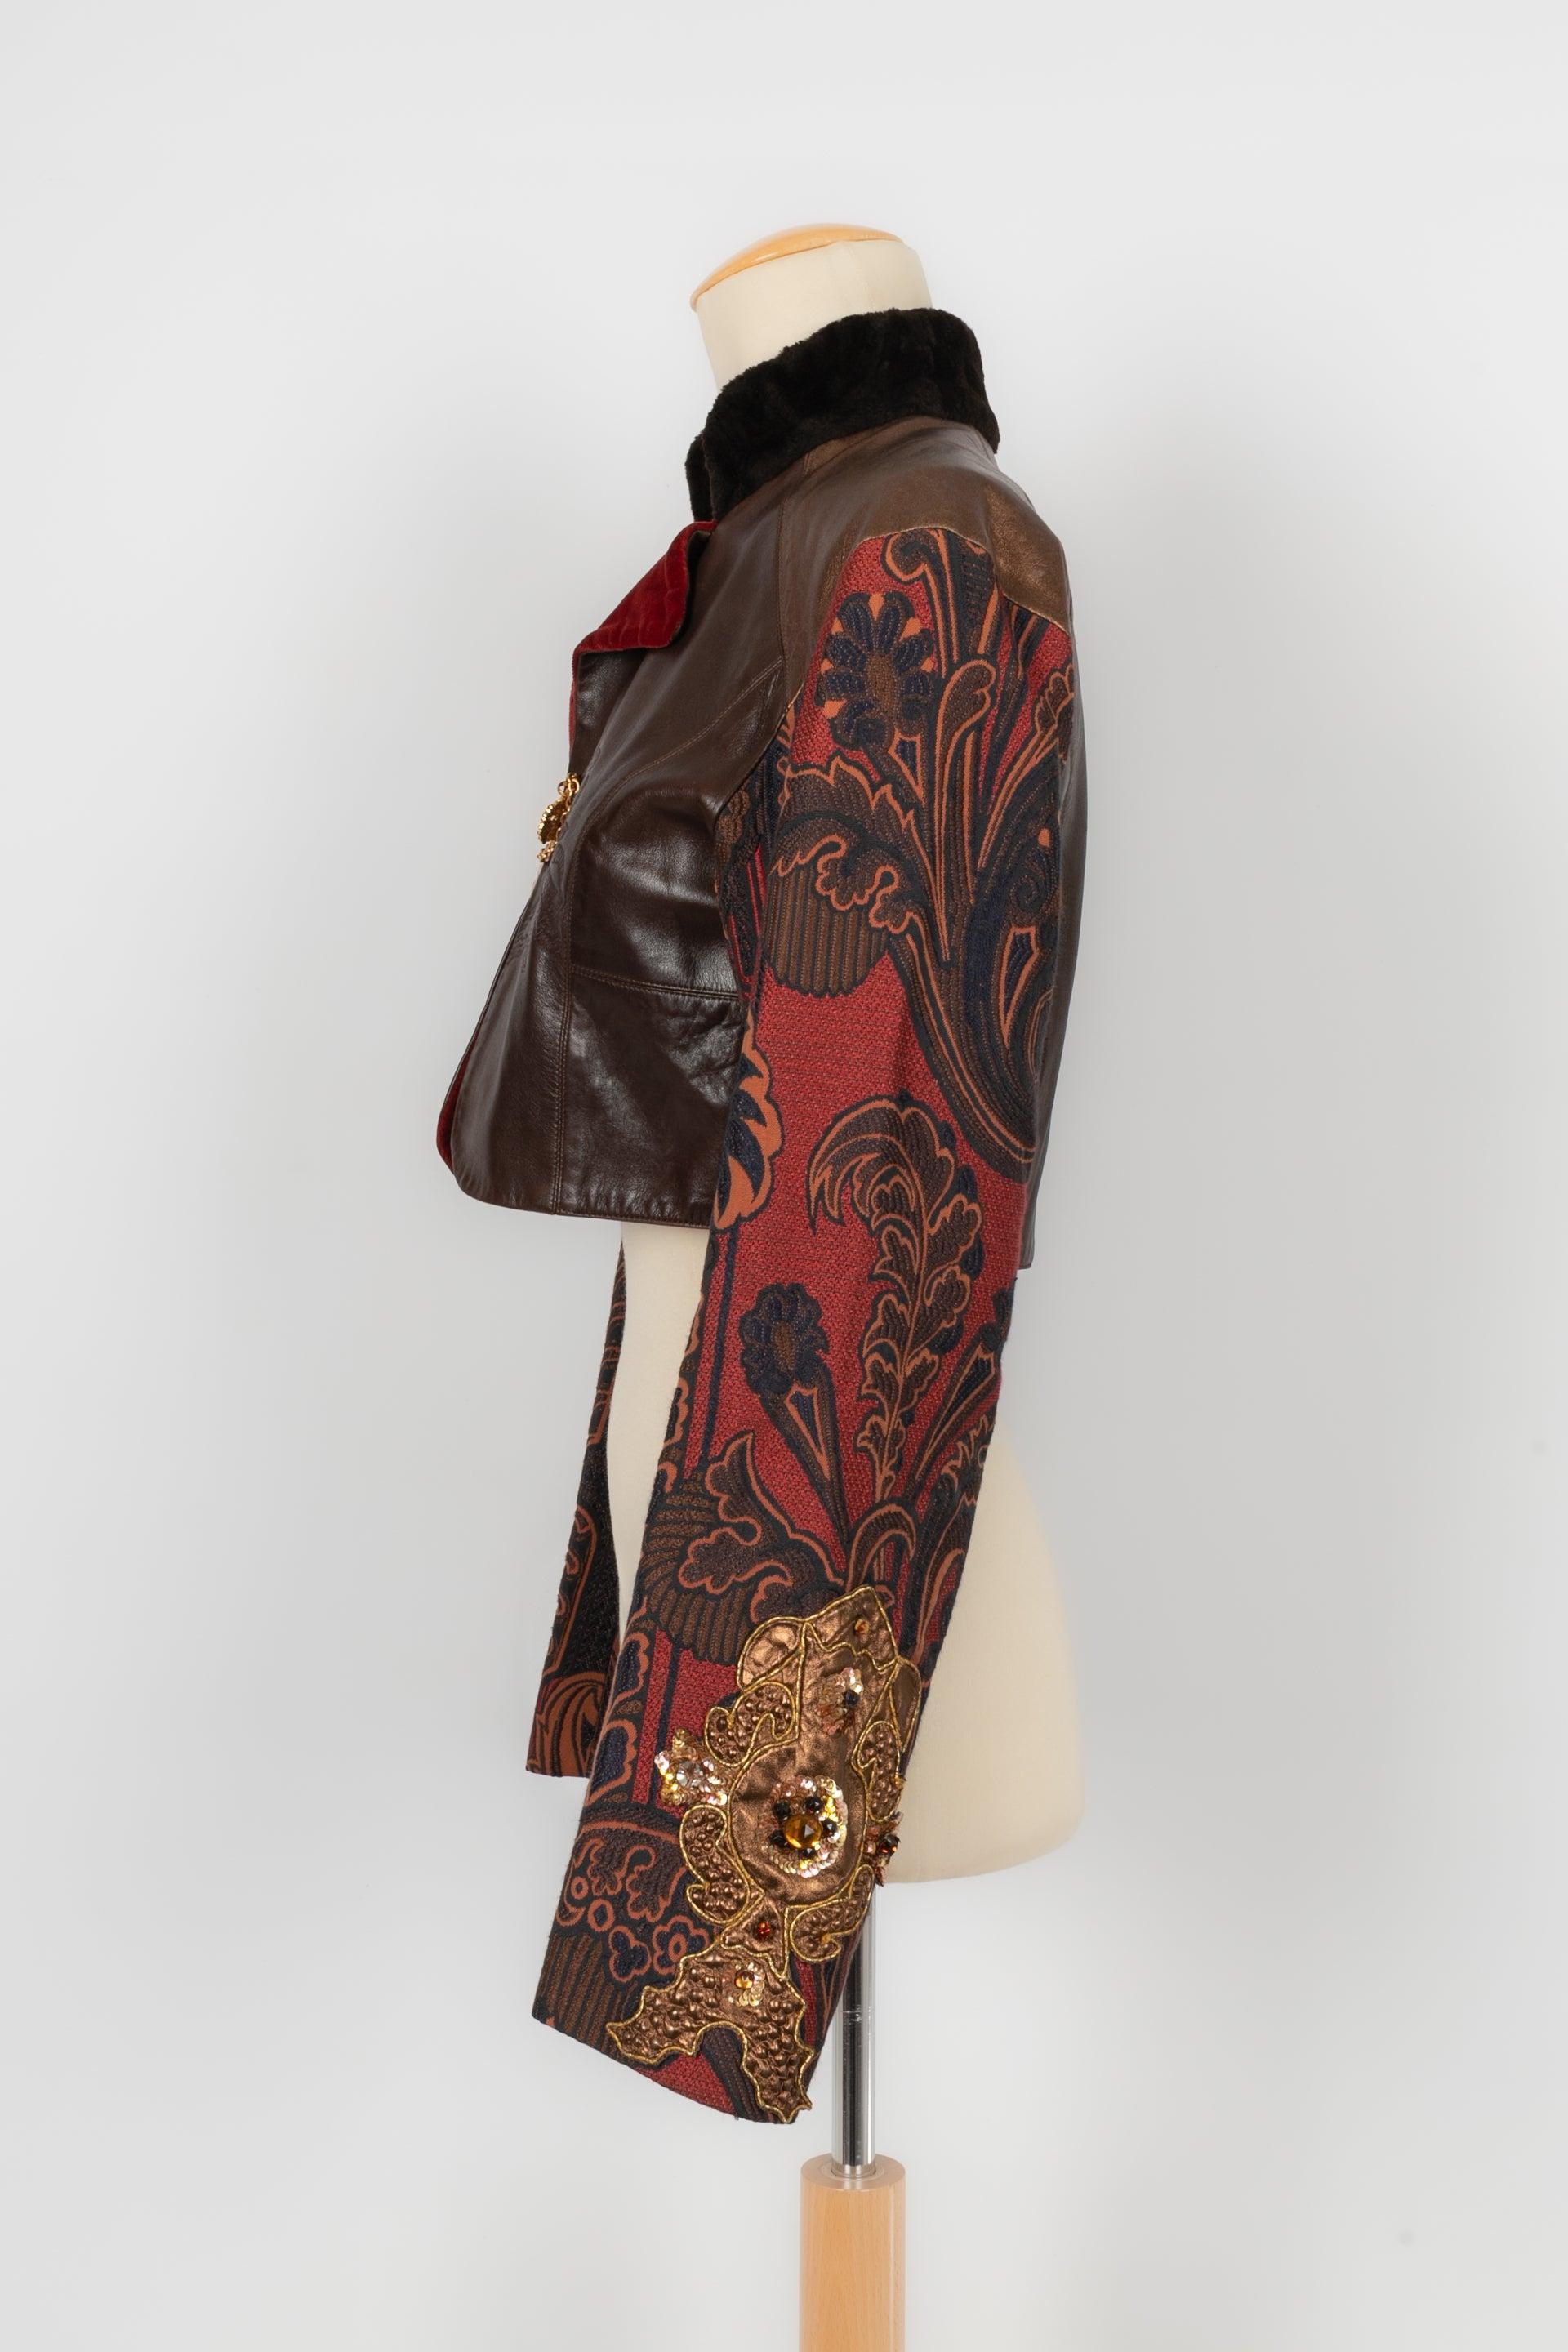 Christian Lacroix - Embroidered fabric and leather short jacket with a velvet and fur collar. No size indicated, it fits a 36FR.

Additional information:
Condition: Very good condition
Dimensions: Shoulder width: 43 cm
Chest: 43 cm
Sleeve length: 60